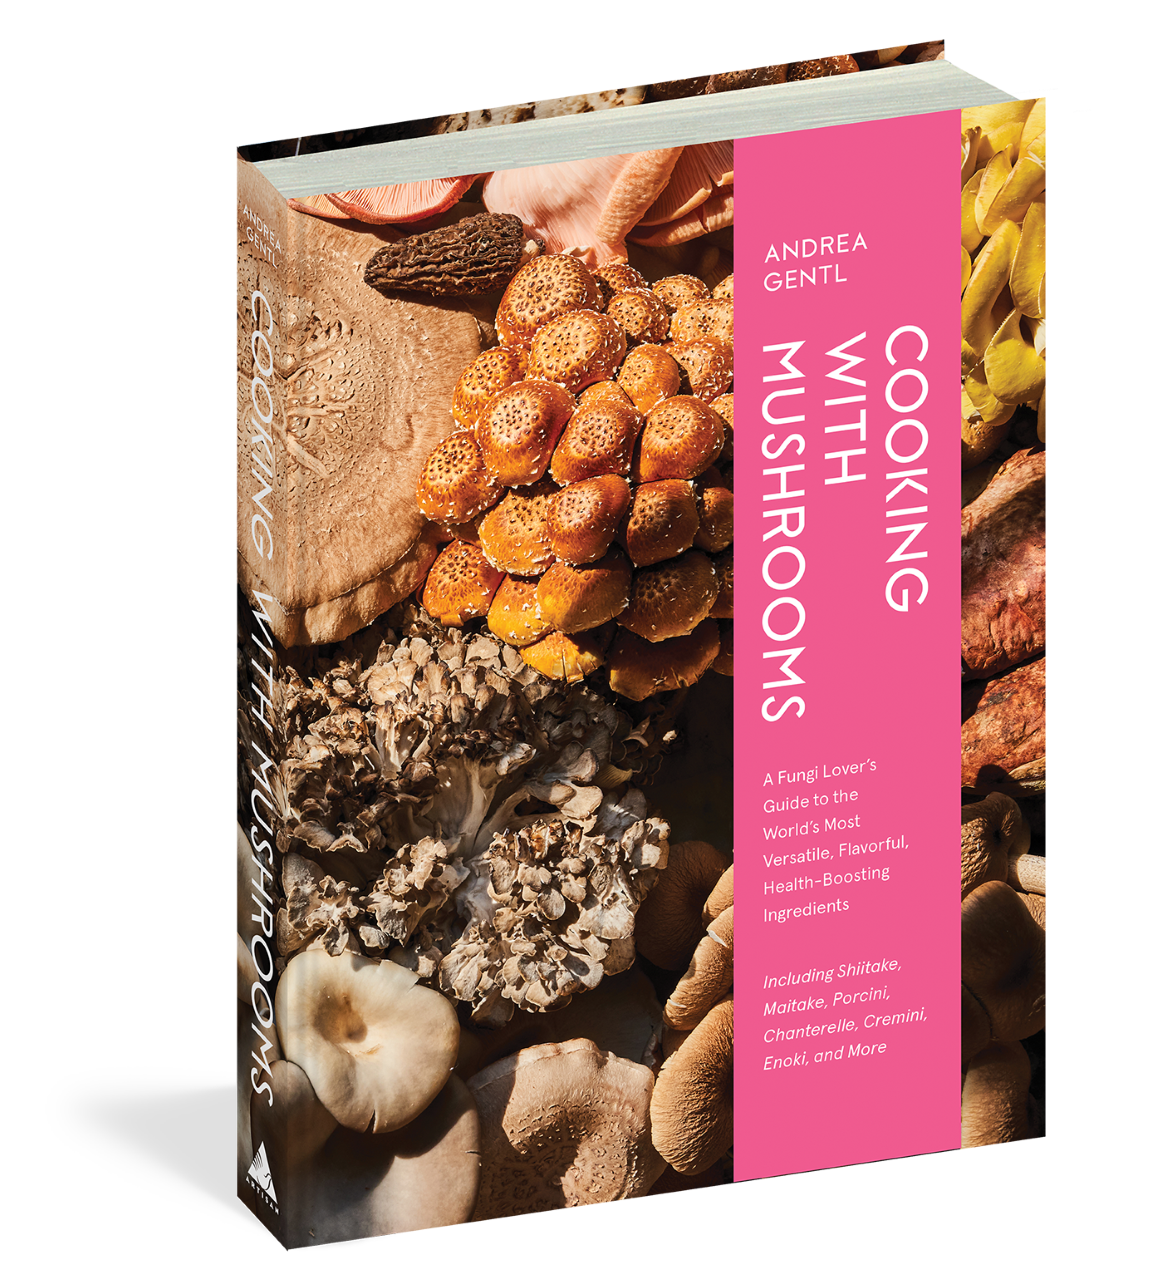 Cooking with Mushrooms: A Fungi Lover's Guide to the World's Most Versatile, Flavorful, Health-Boosting Ingredients (Andrea Gentl)